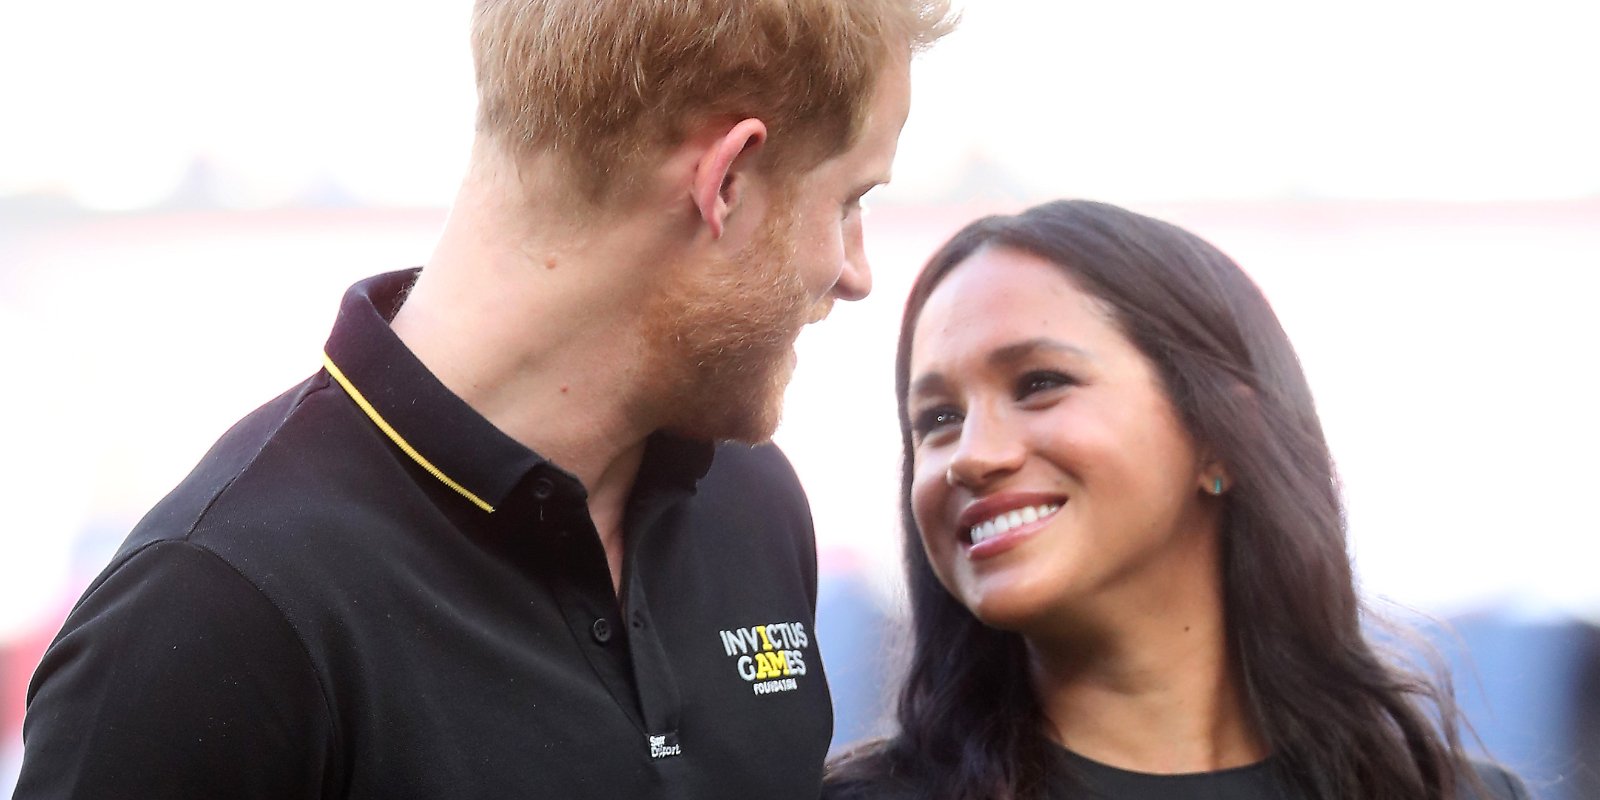 Prince Harry and Meghan Markle look at one another during an Invictus Games event.